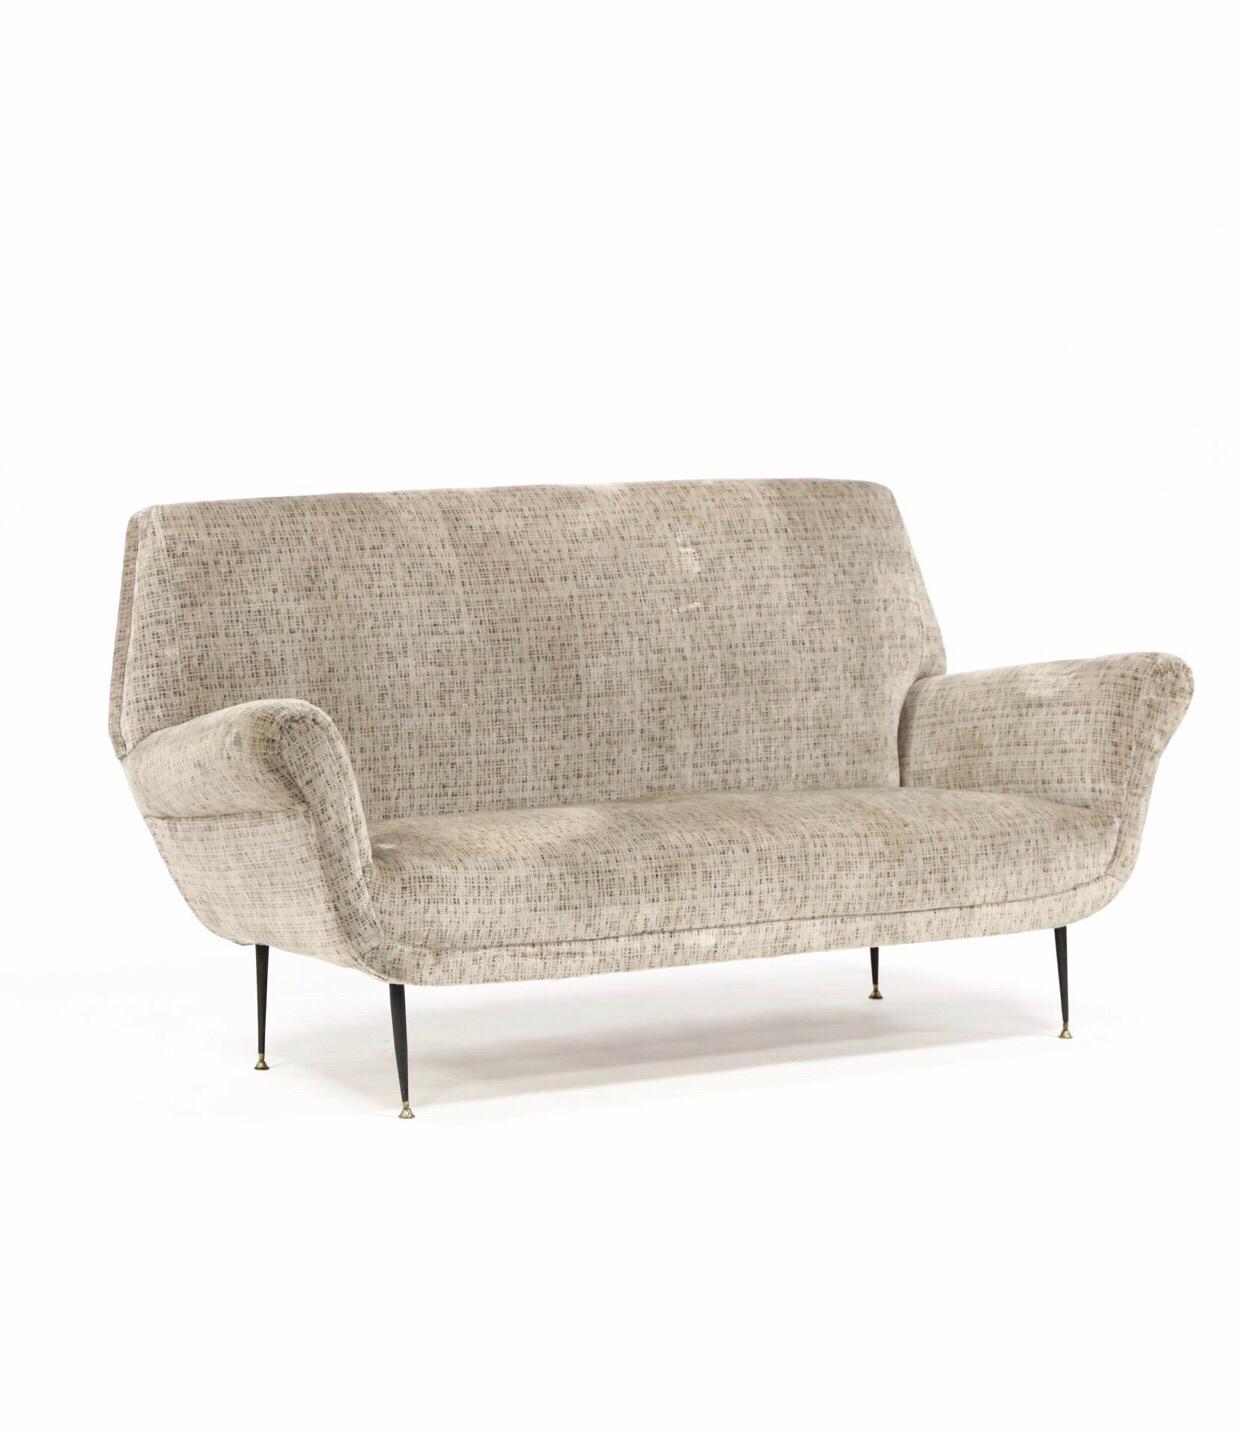 A Classic Italian modern loveseat by Gigi Radice having sexy curves and smartly designed lines. The smaller sofa resides in older clothes that are sturdy and clean yet could use updating depending on your needs. We love this form for mixing all the